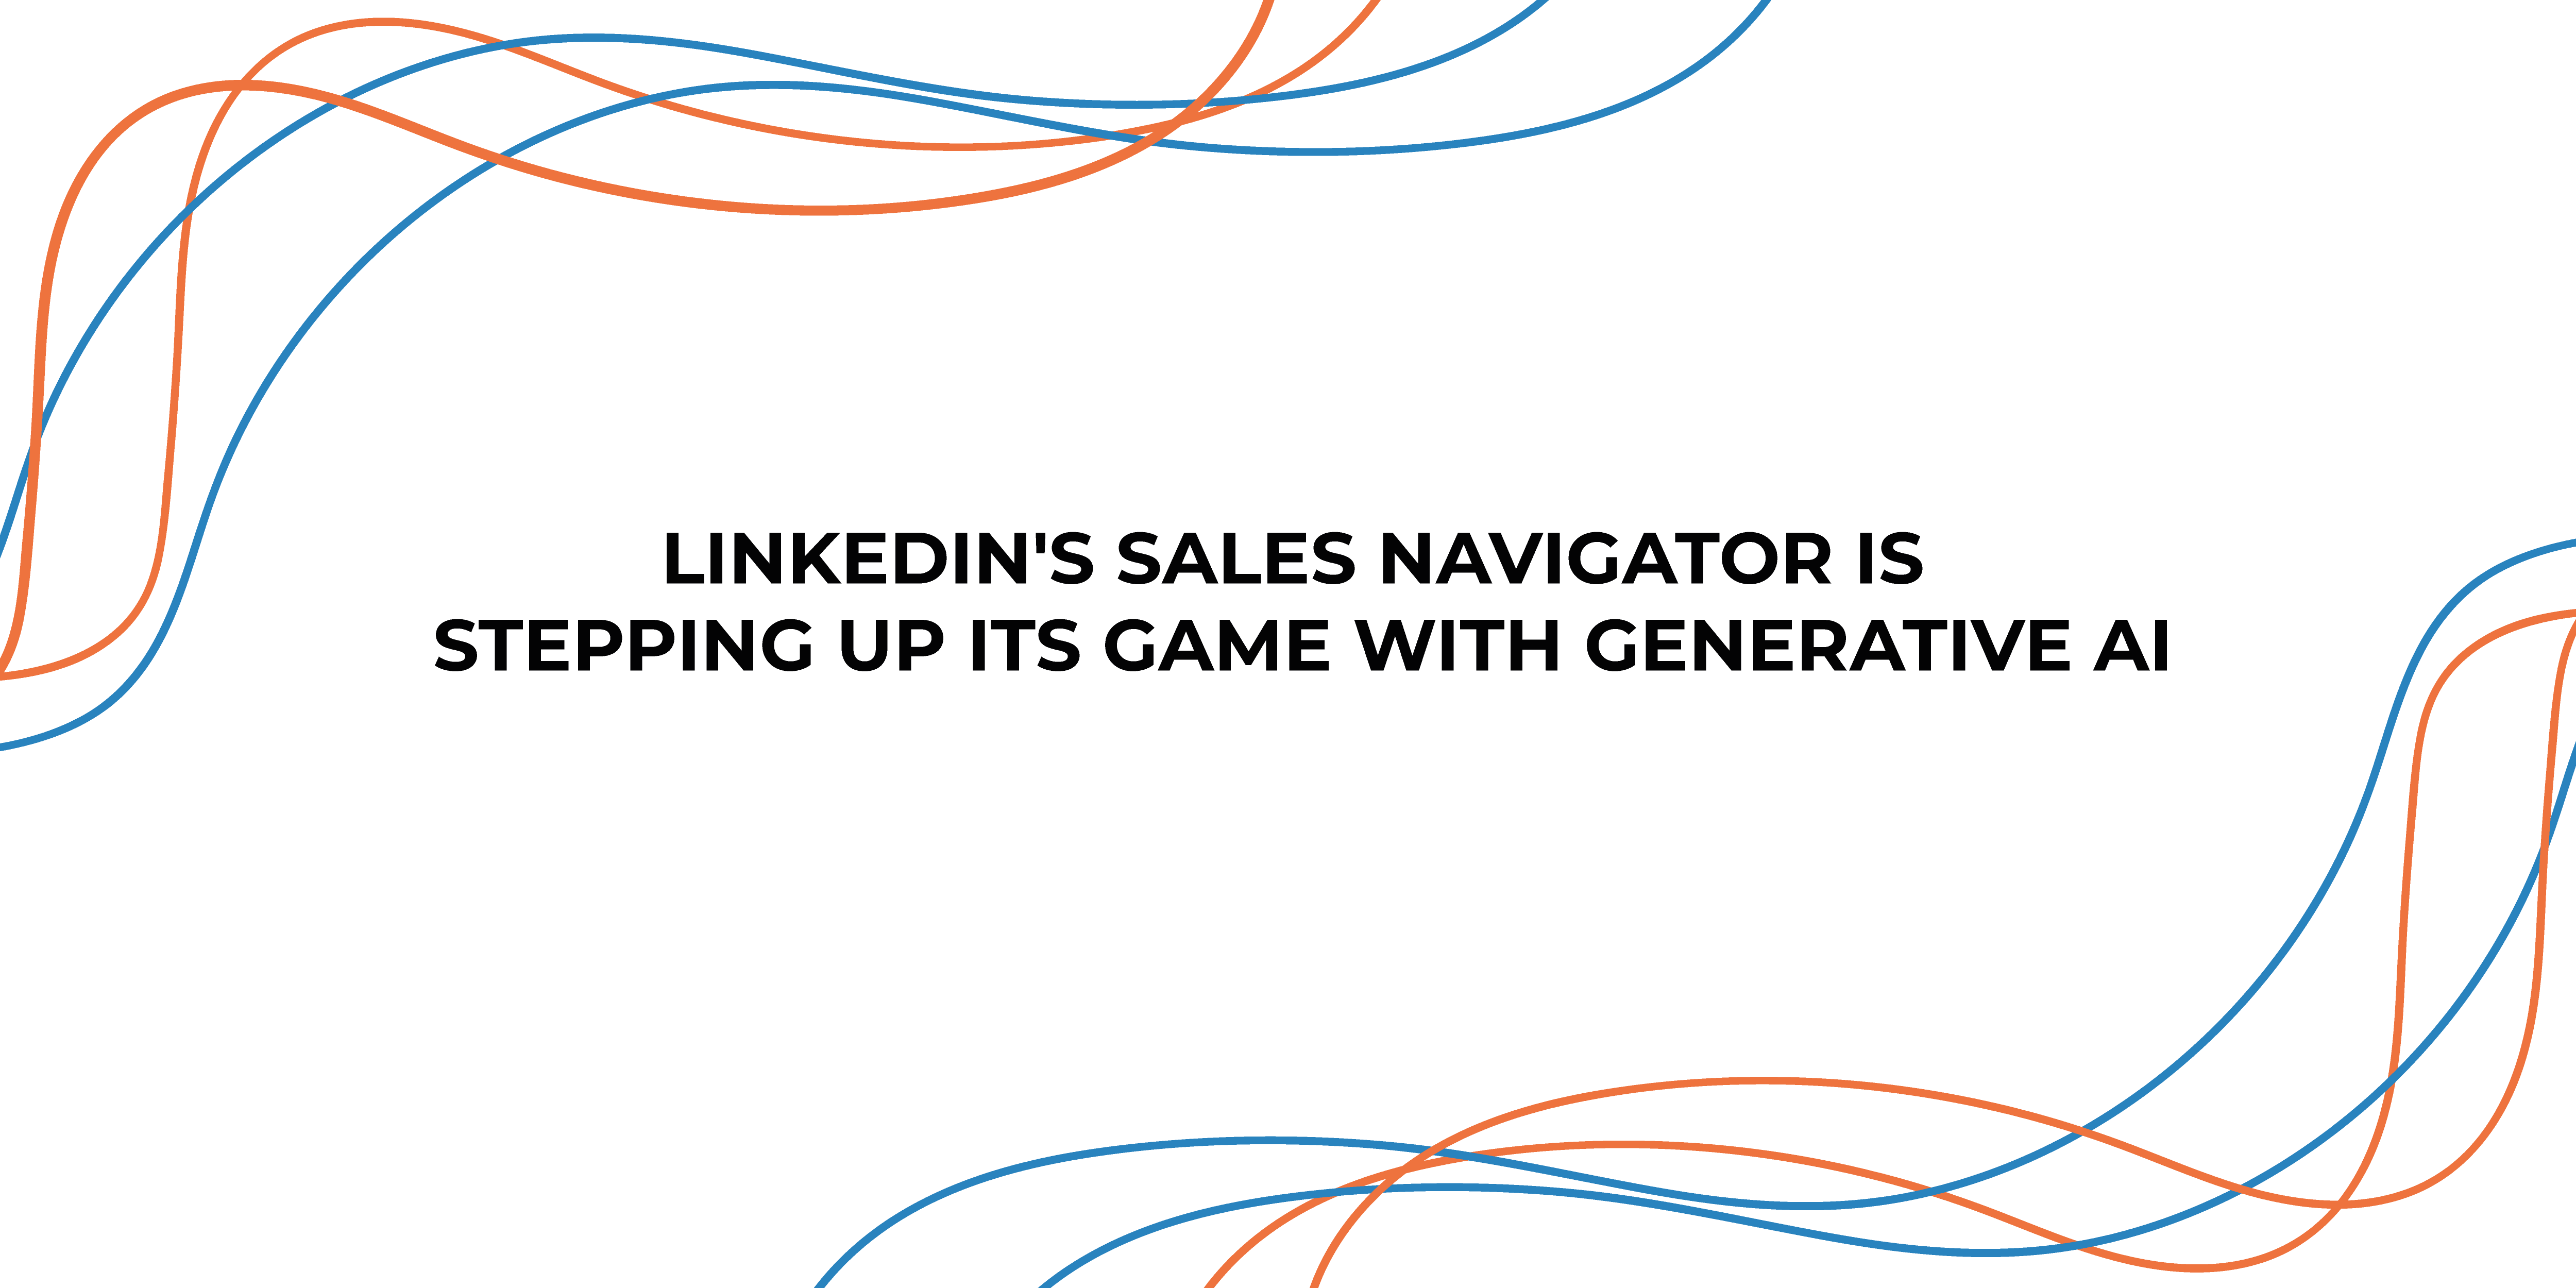 LINKEDIN'S SALES NAVIGATOR IS STEPPING UP ITS GAME WITH GENERATIVE AI!